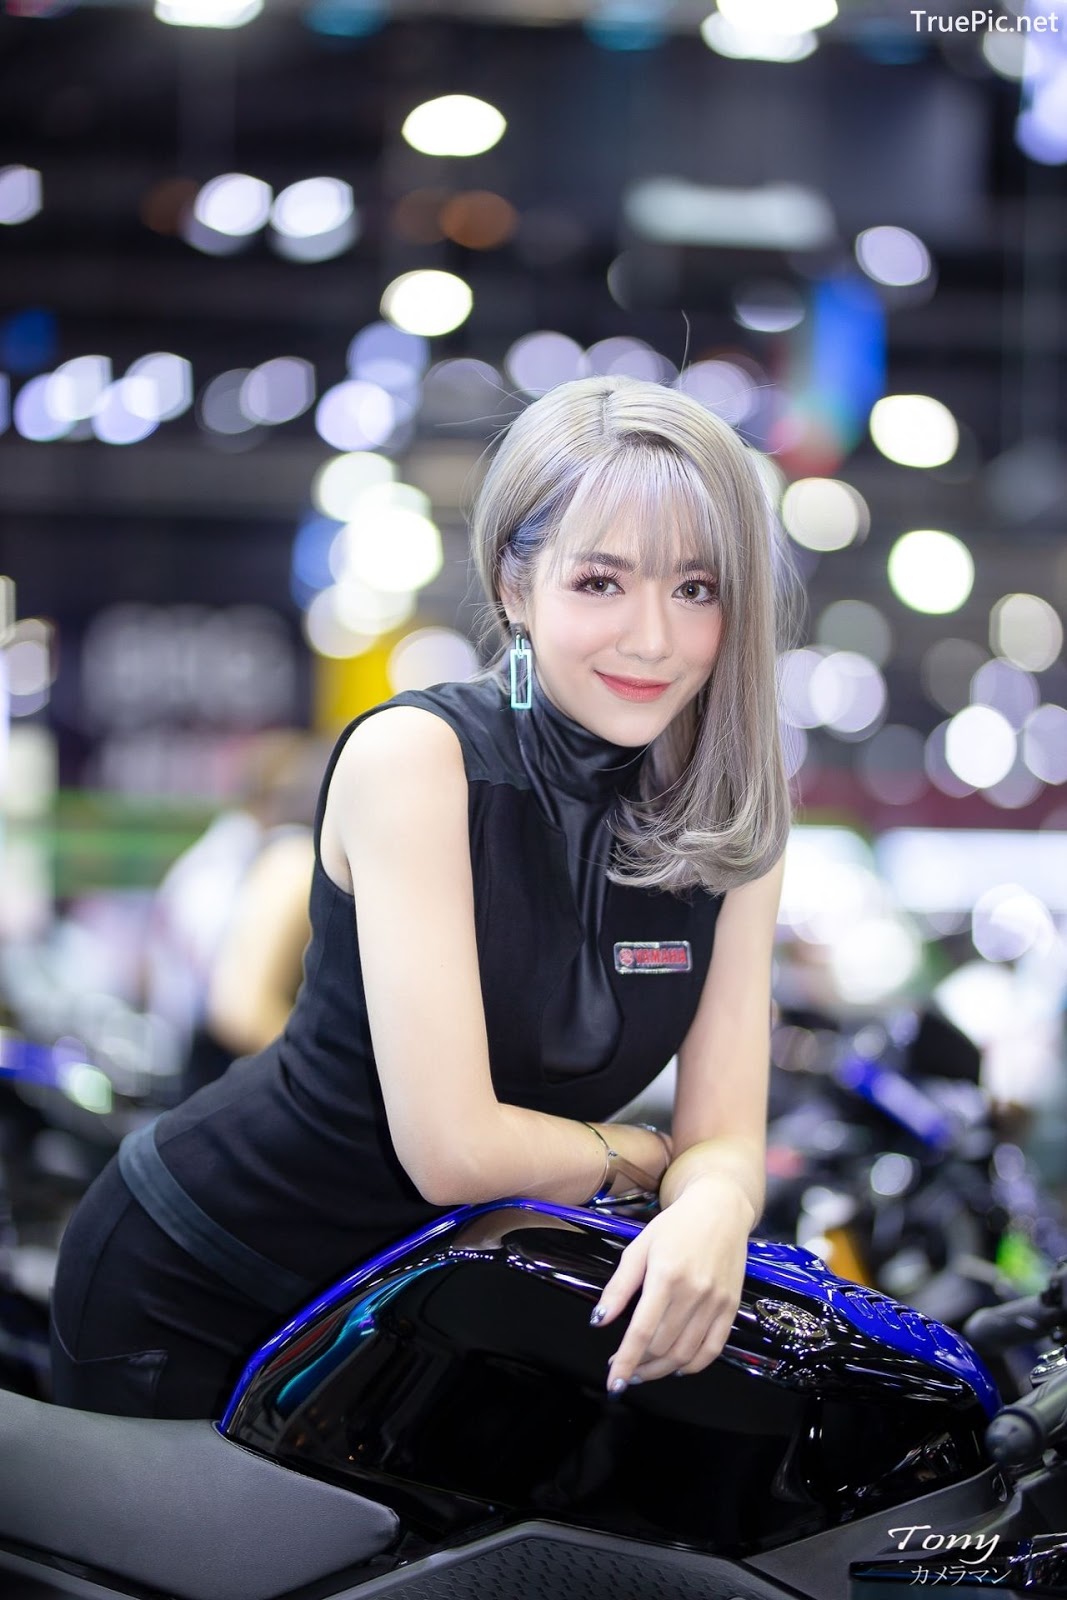 Image-Thailand-Hot-Model-Thai-Racing-Girl-At-Motor-Expo-2019-TruePic.net- Picture-111